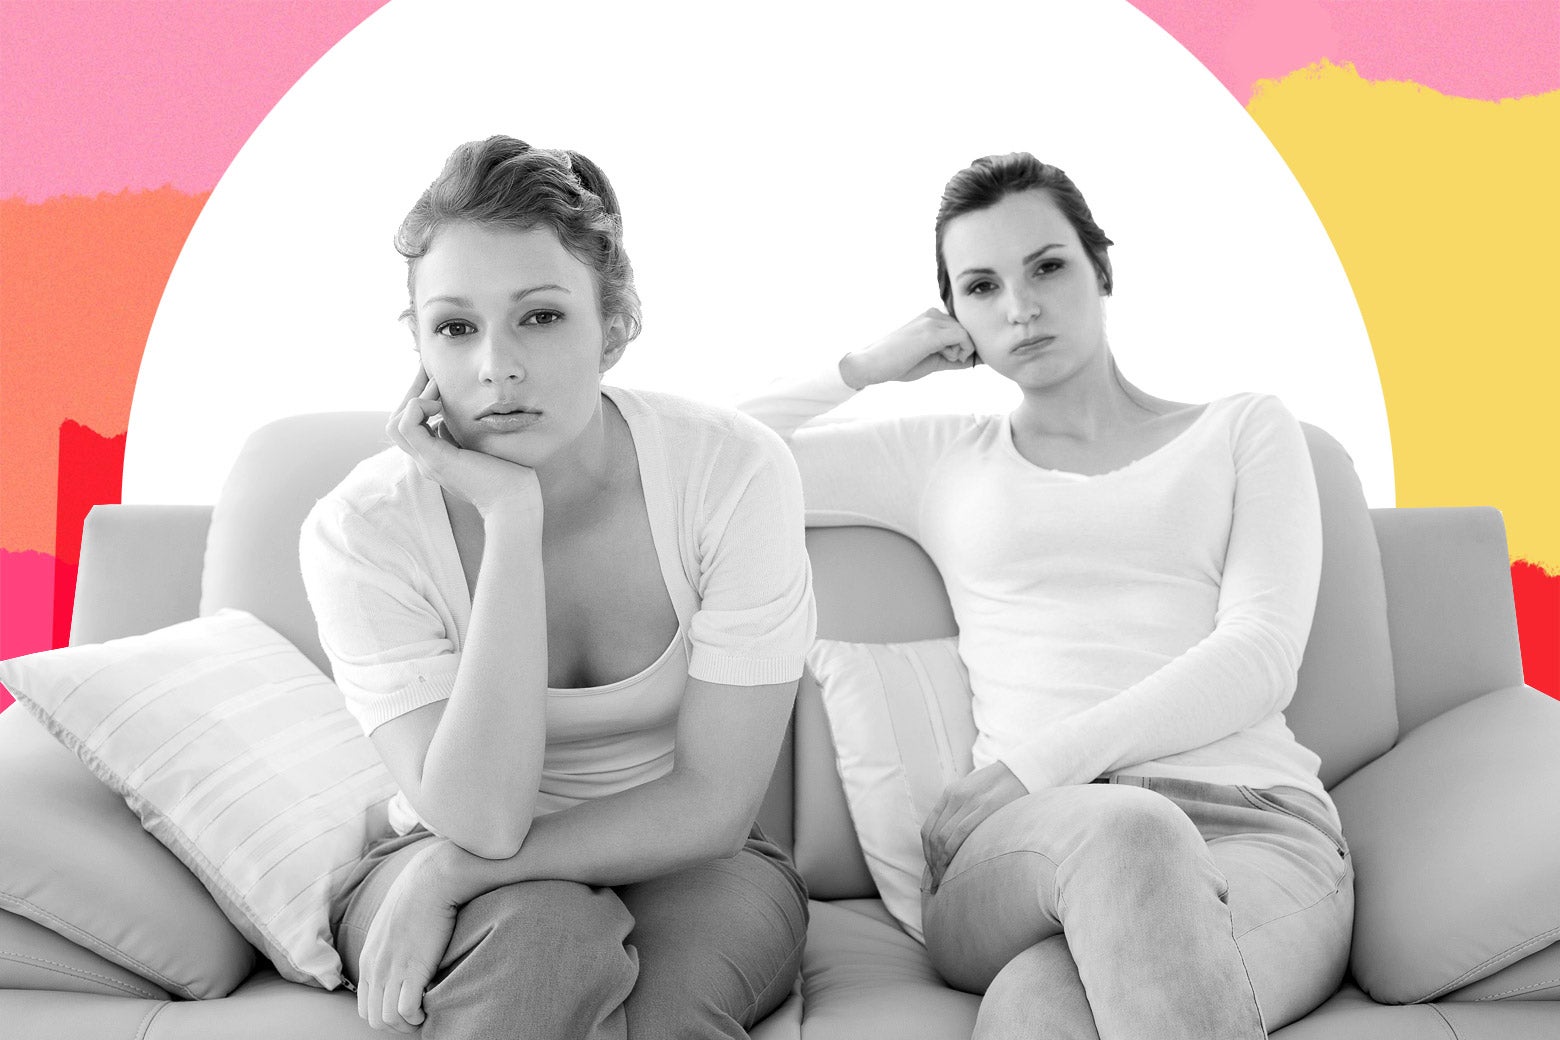 Two young women sitting on the couch looking directly at the camera as if they are fed up.